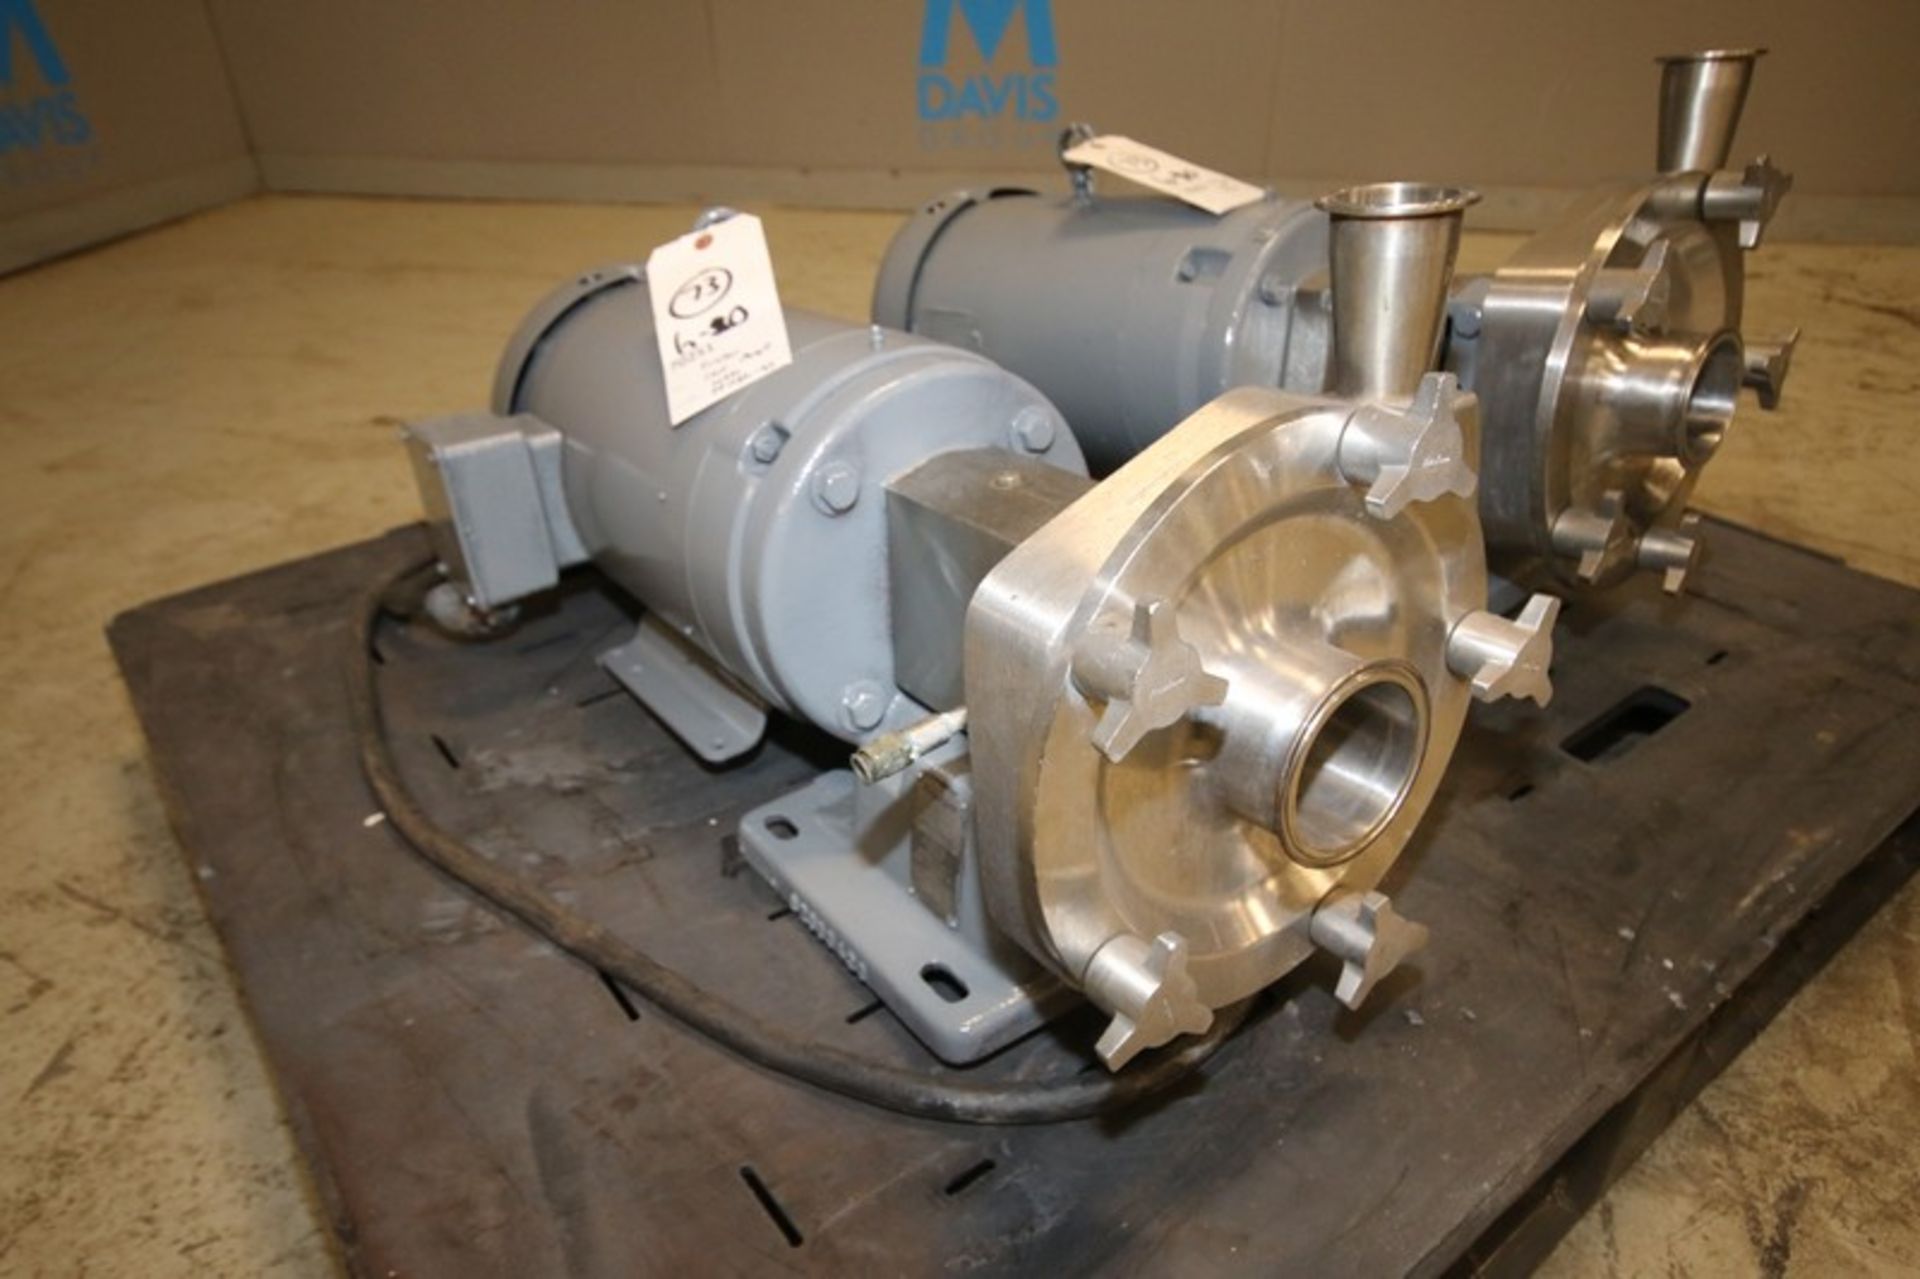 Fristam Aprox. 10 hp Centrifugal Pump, M/N FP1732-165, S/N FP175229739919, with Aprox. 2" x 3" Clamp